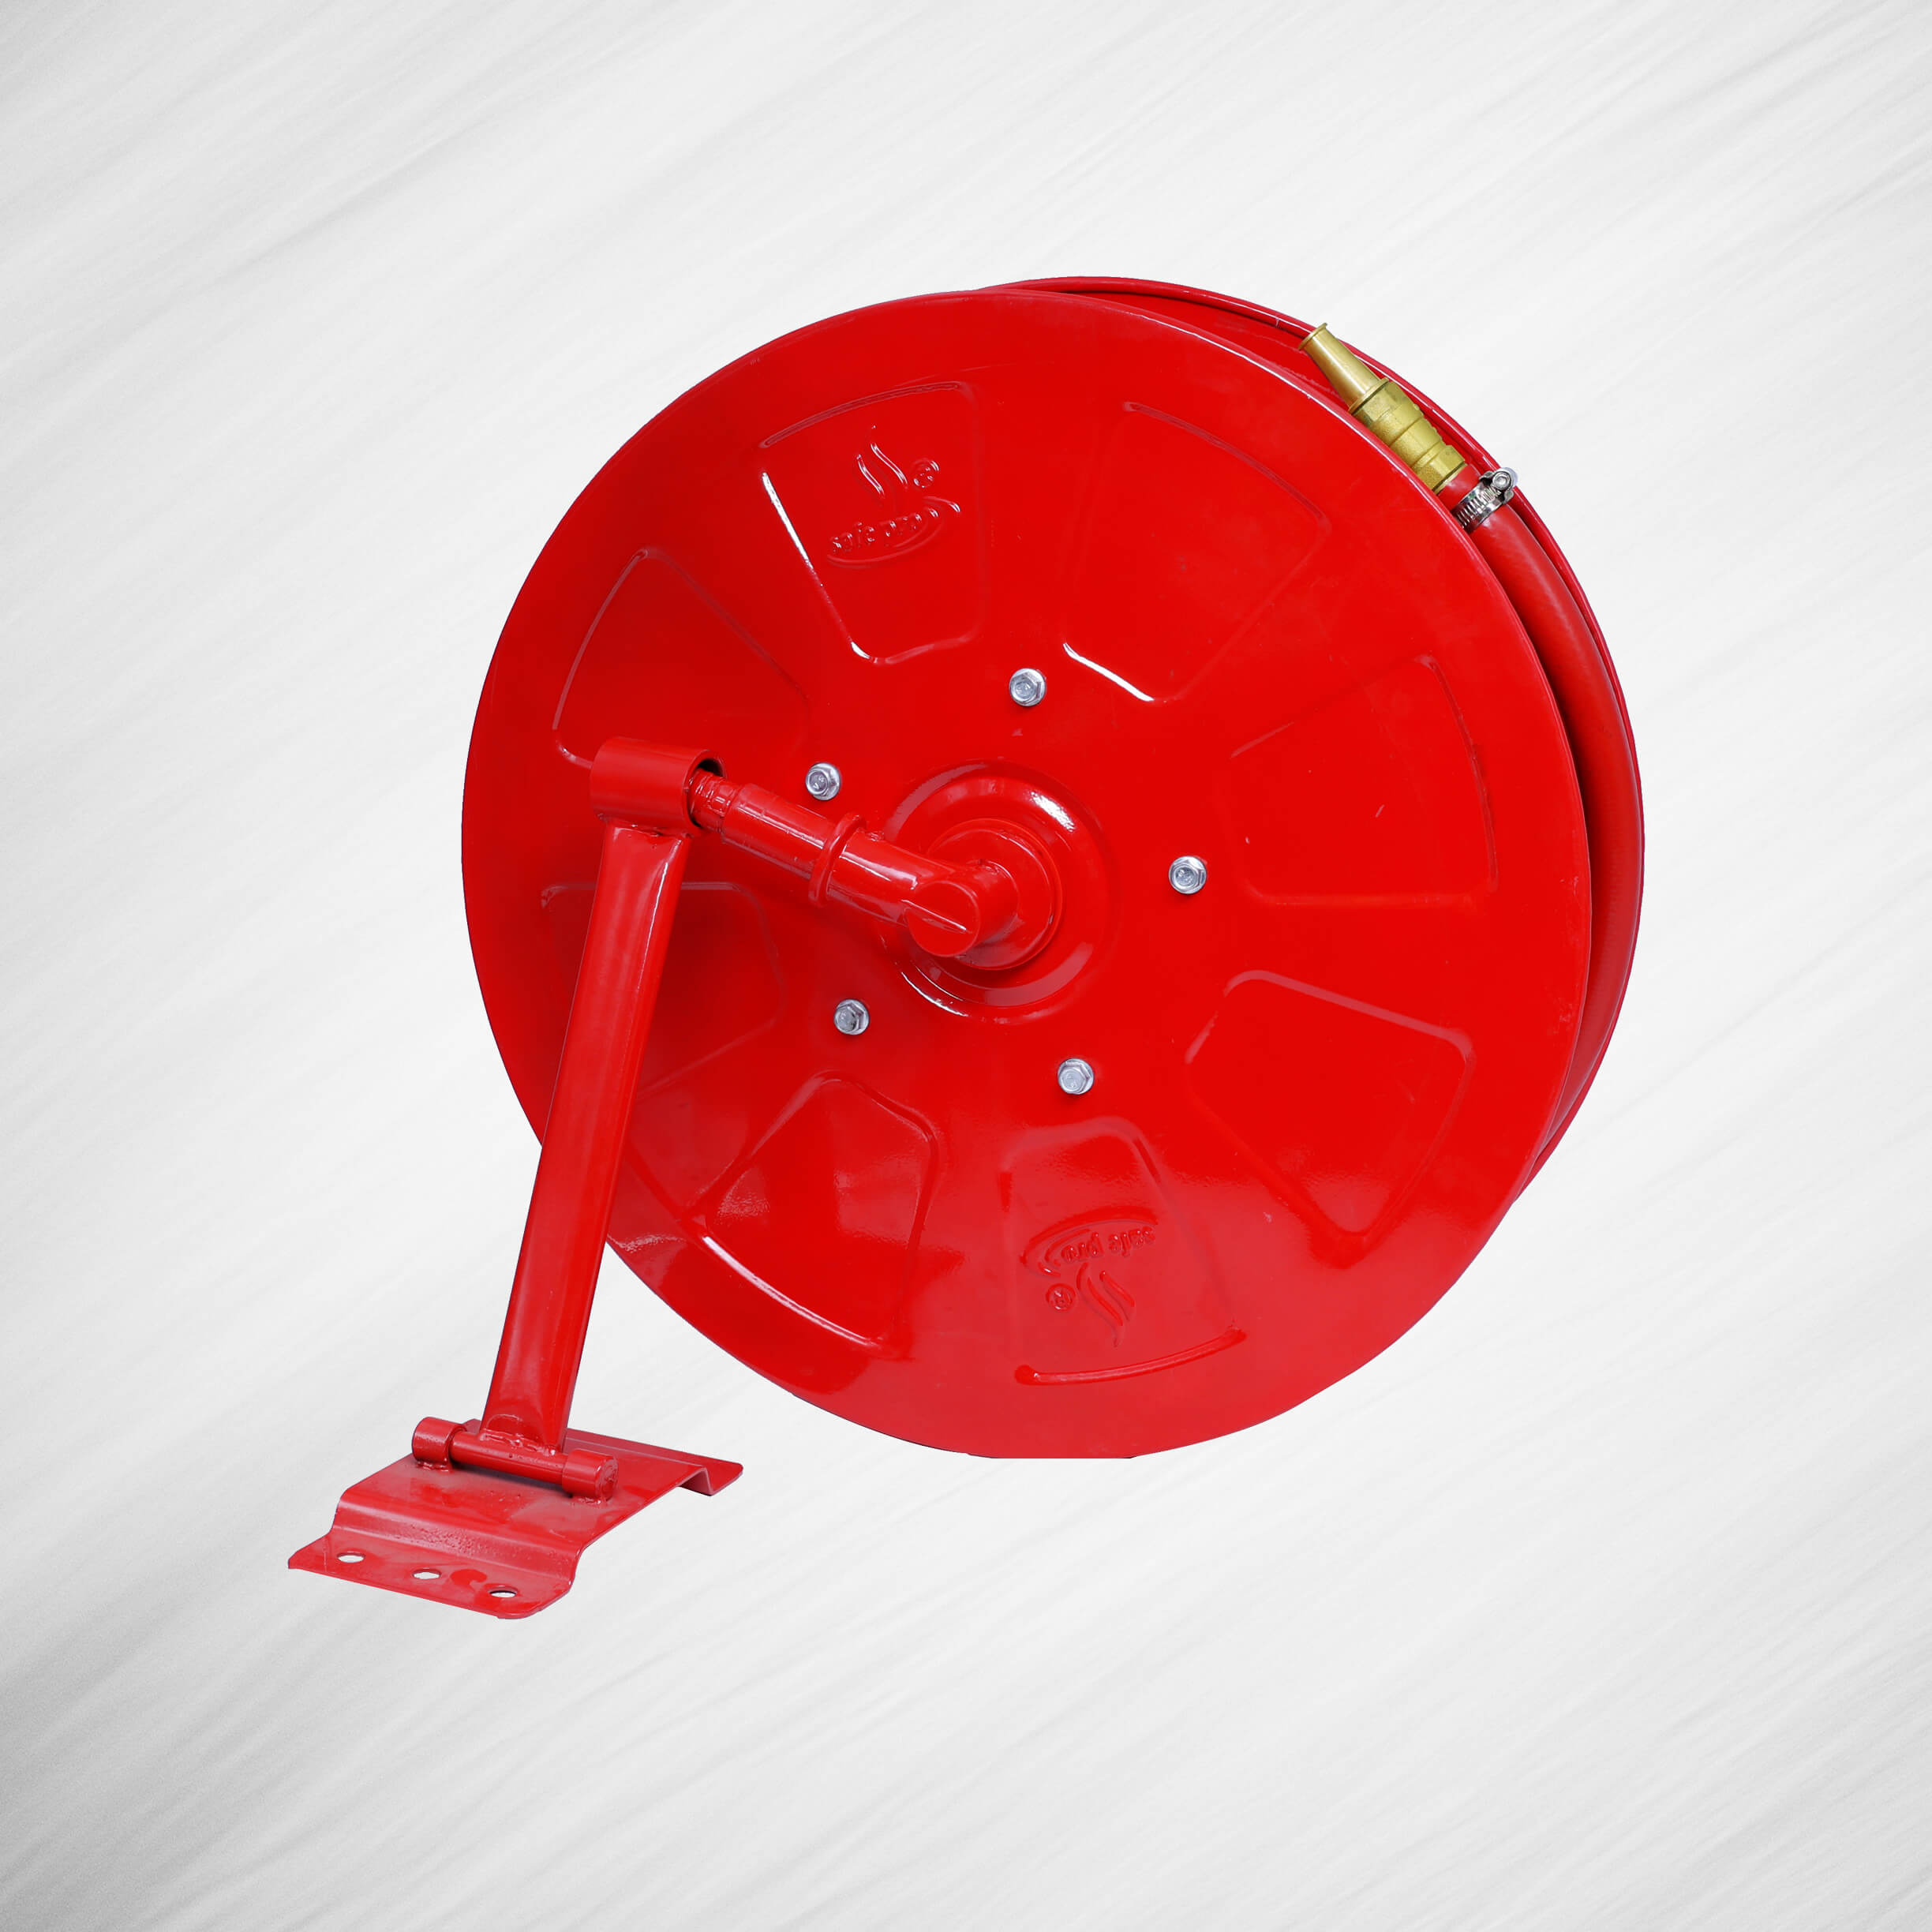 Hose Reel Drum - FIRE HYDRANT SYSTEM